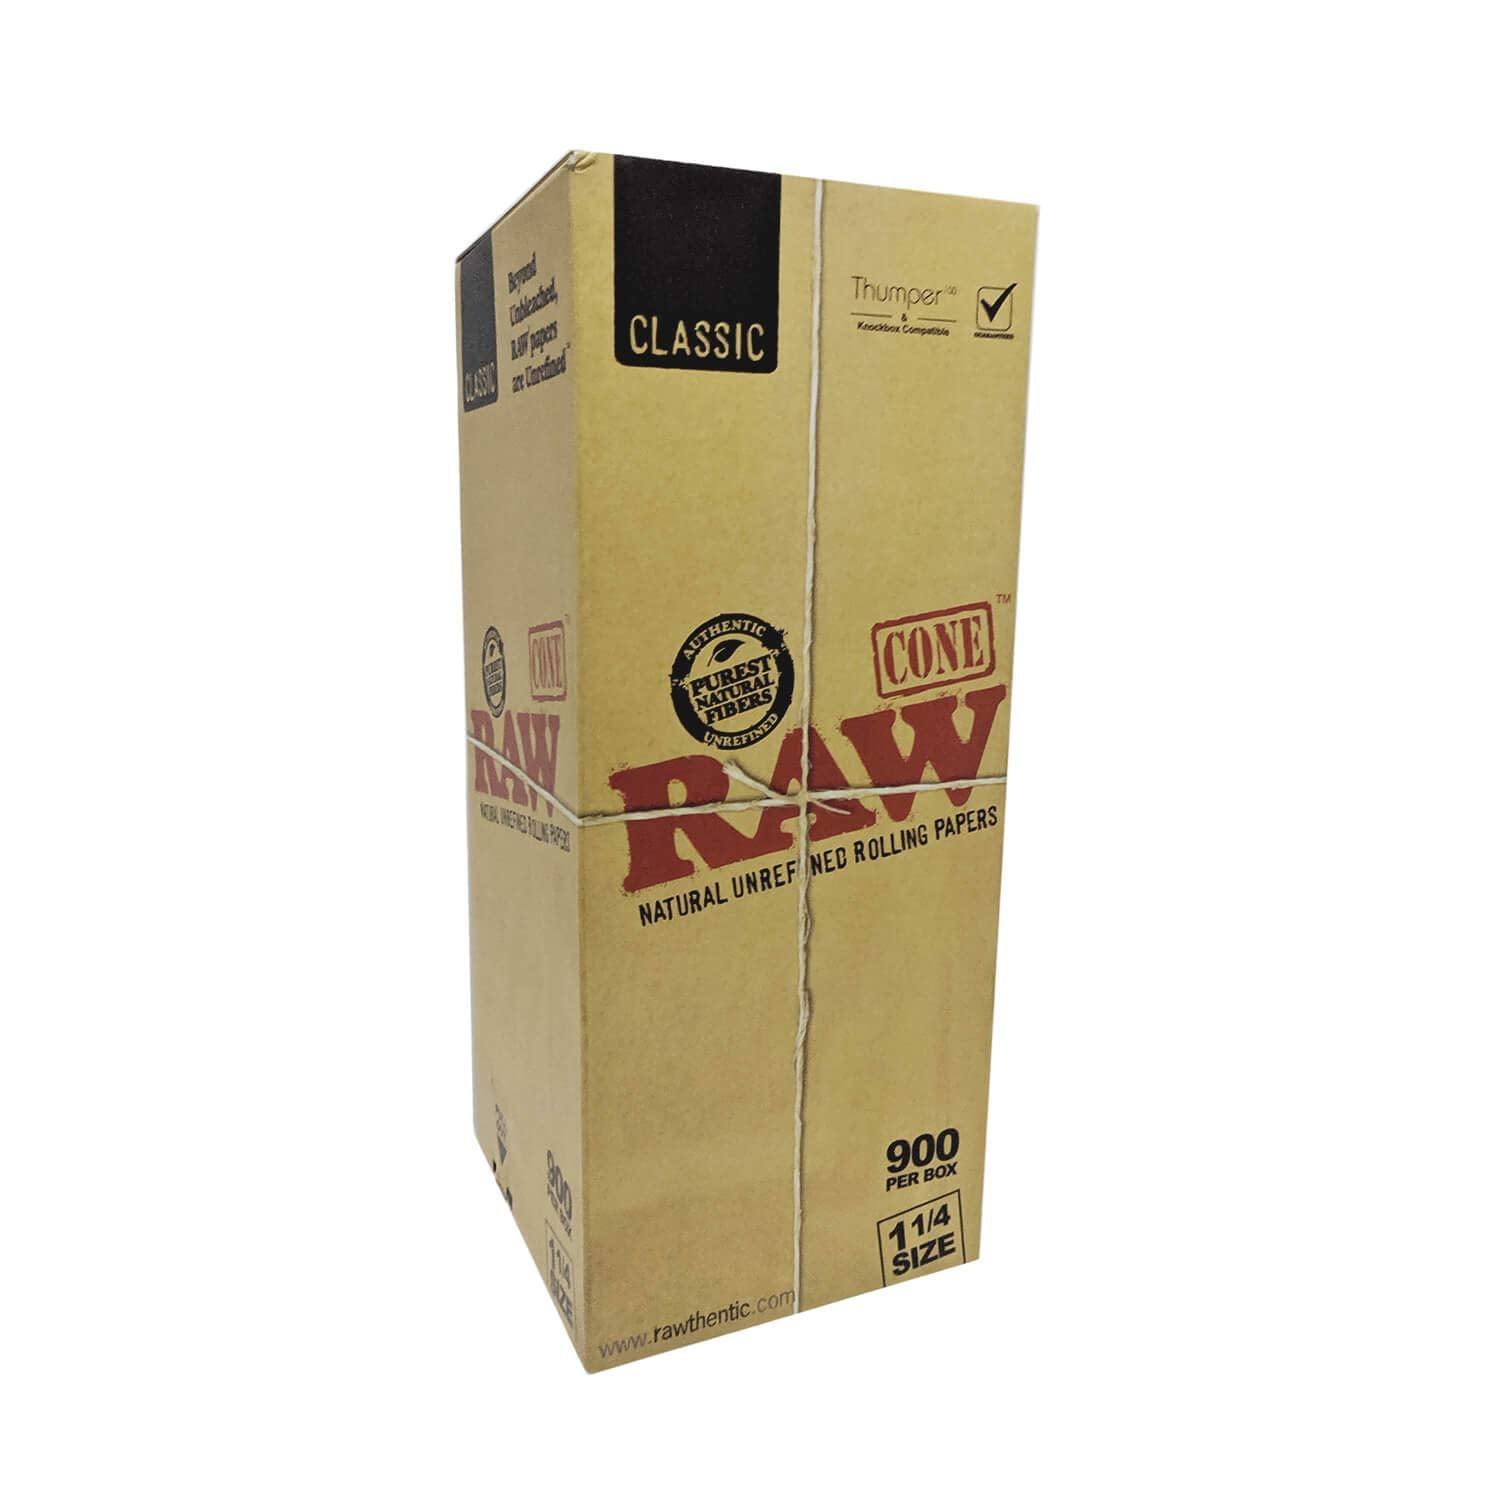 RAW 26mm 1 1/4 Size Pre-Rolled Paper Cones 900/Box